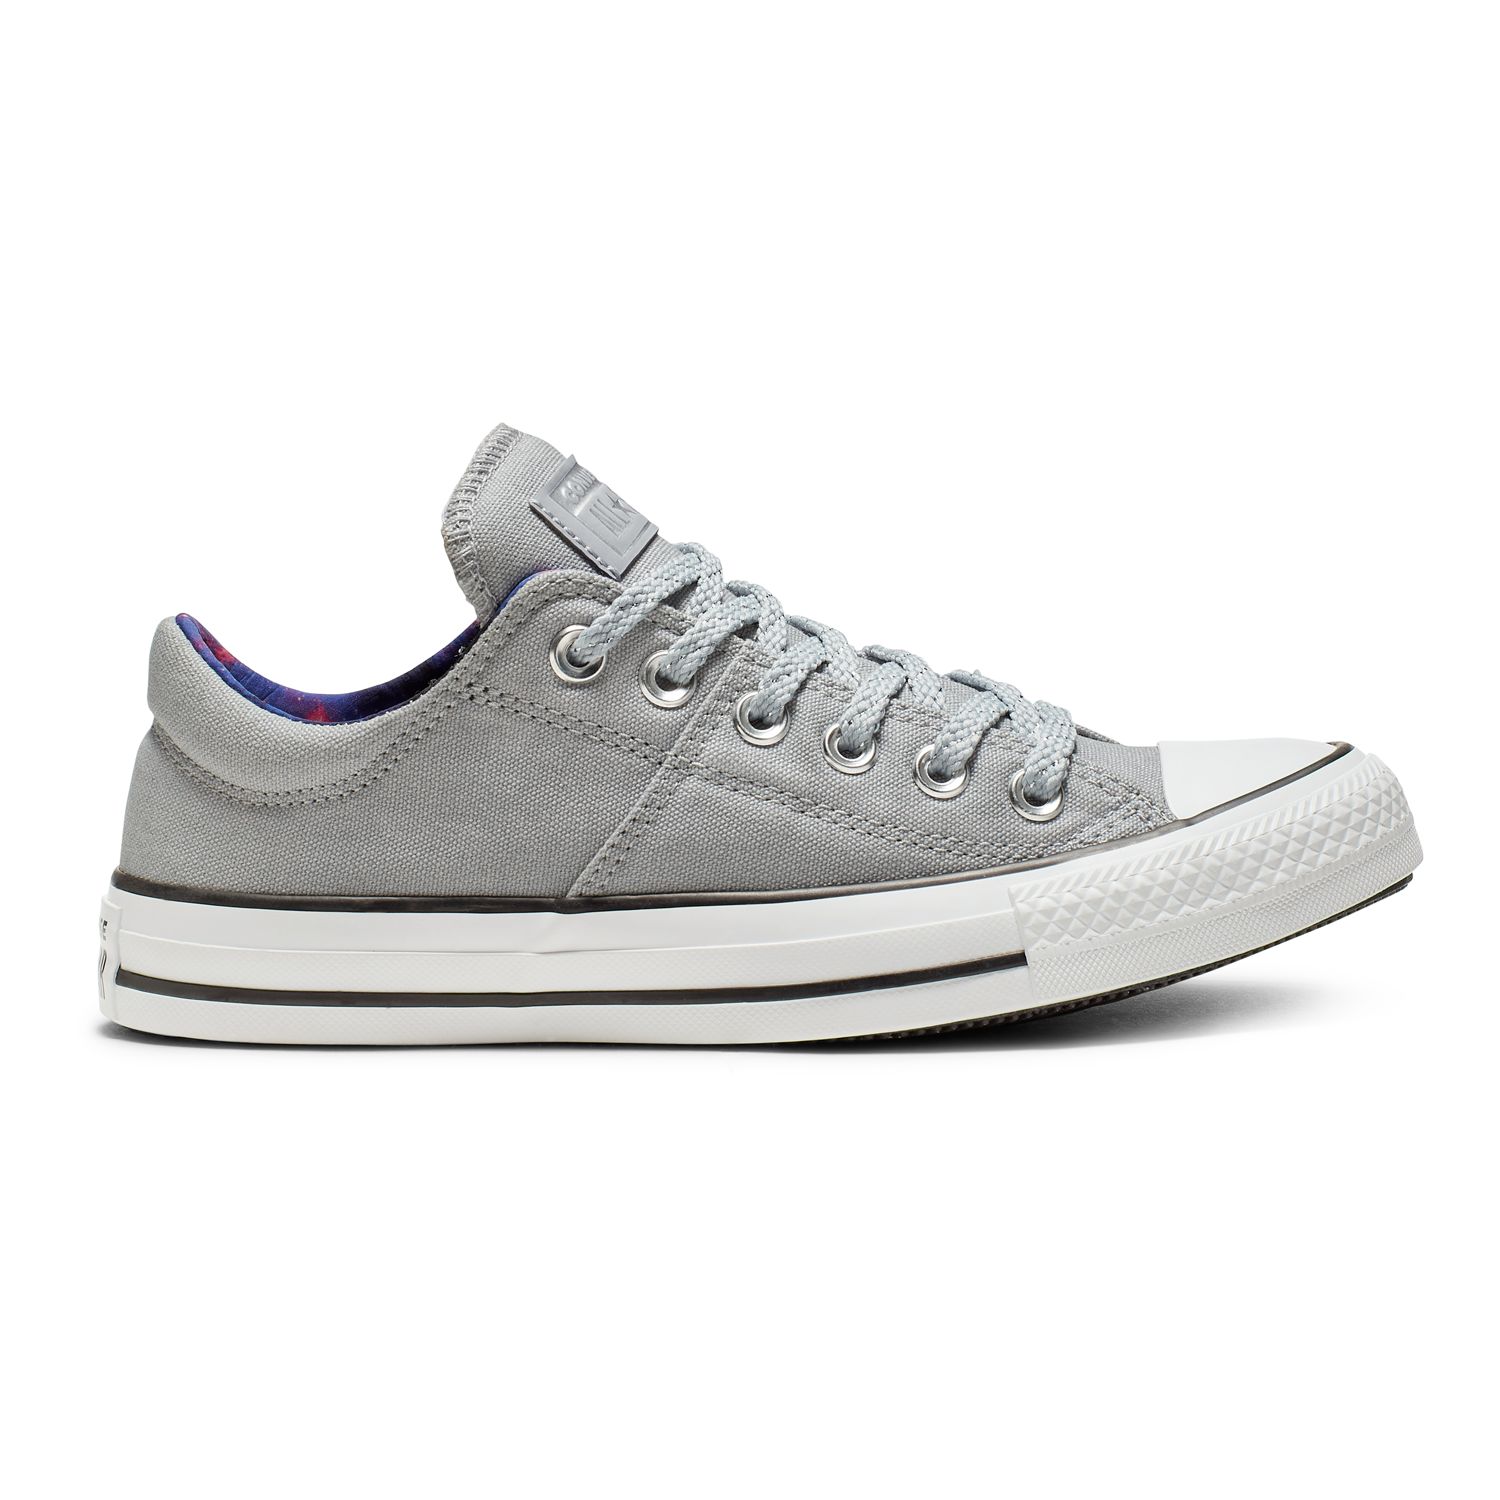 women's converse all star galaxy madison low top sneakers